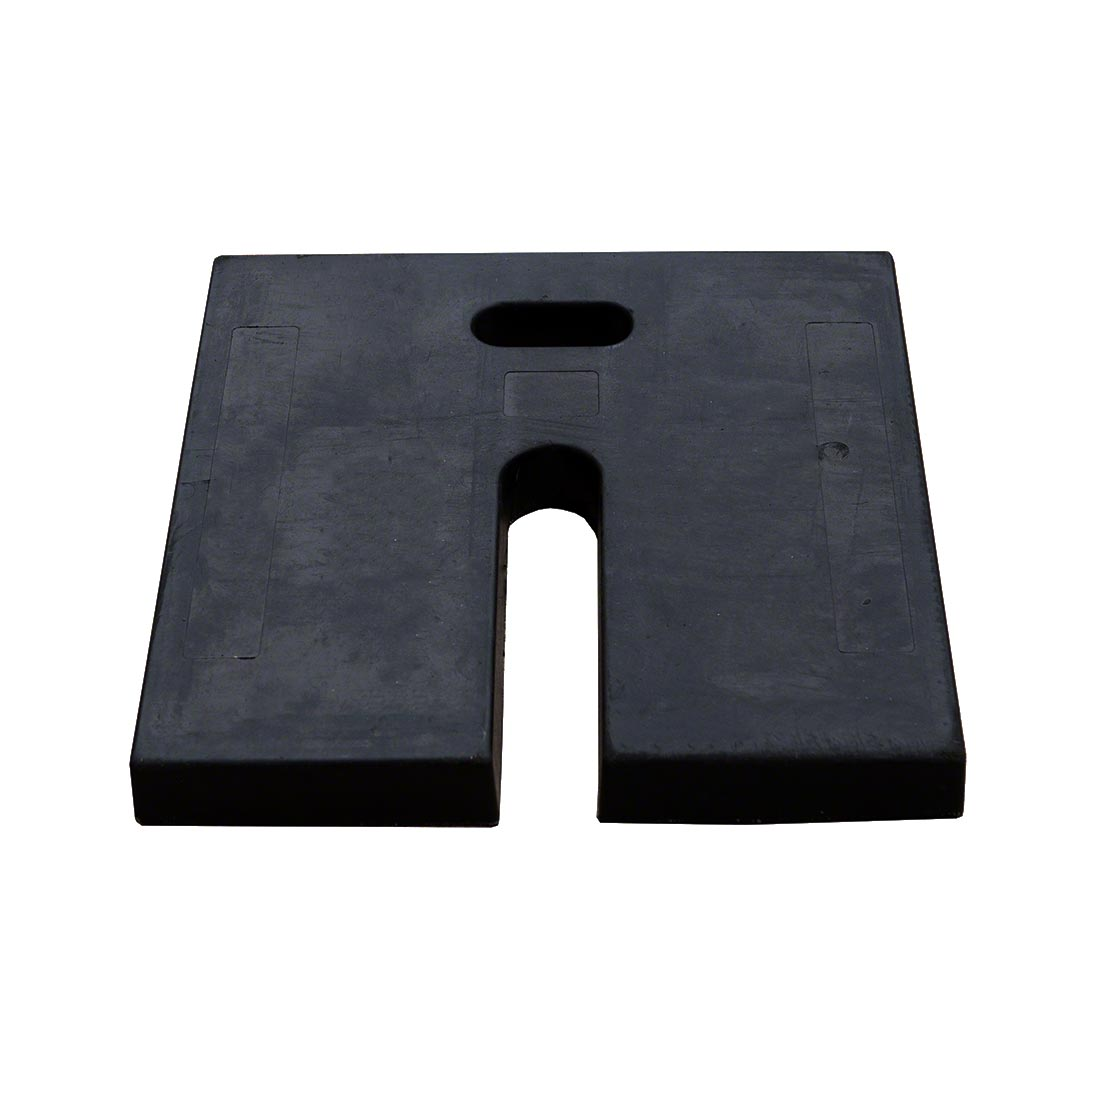 black rubber weight for pipe and drape base plate